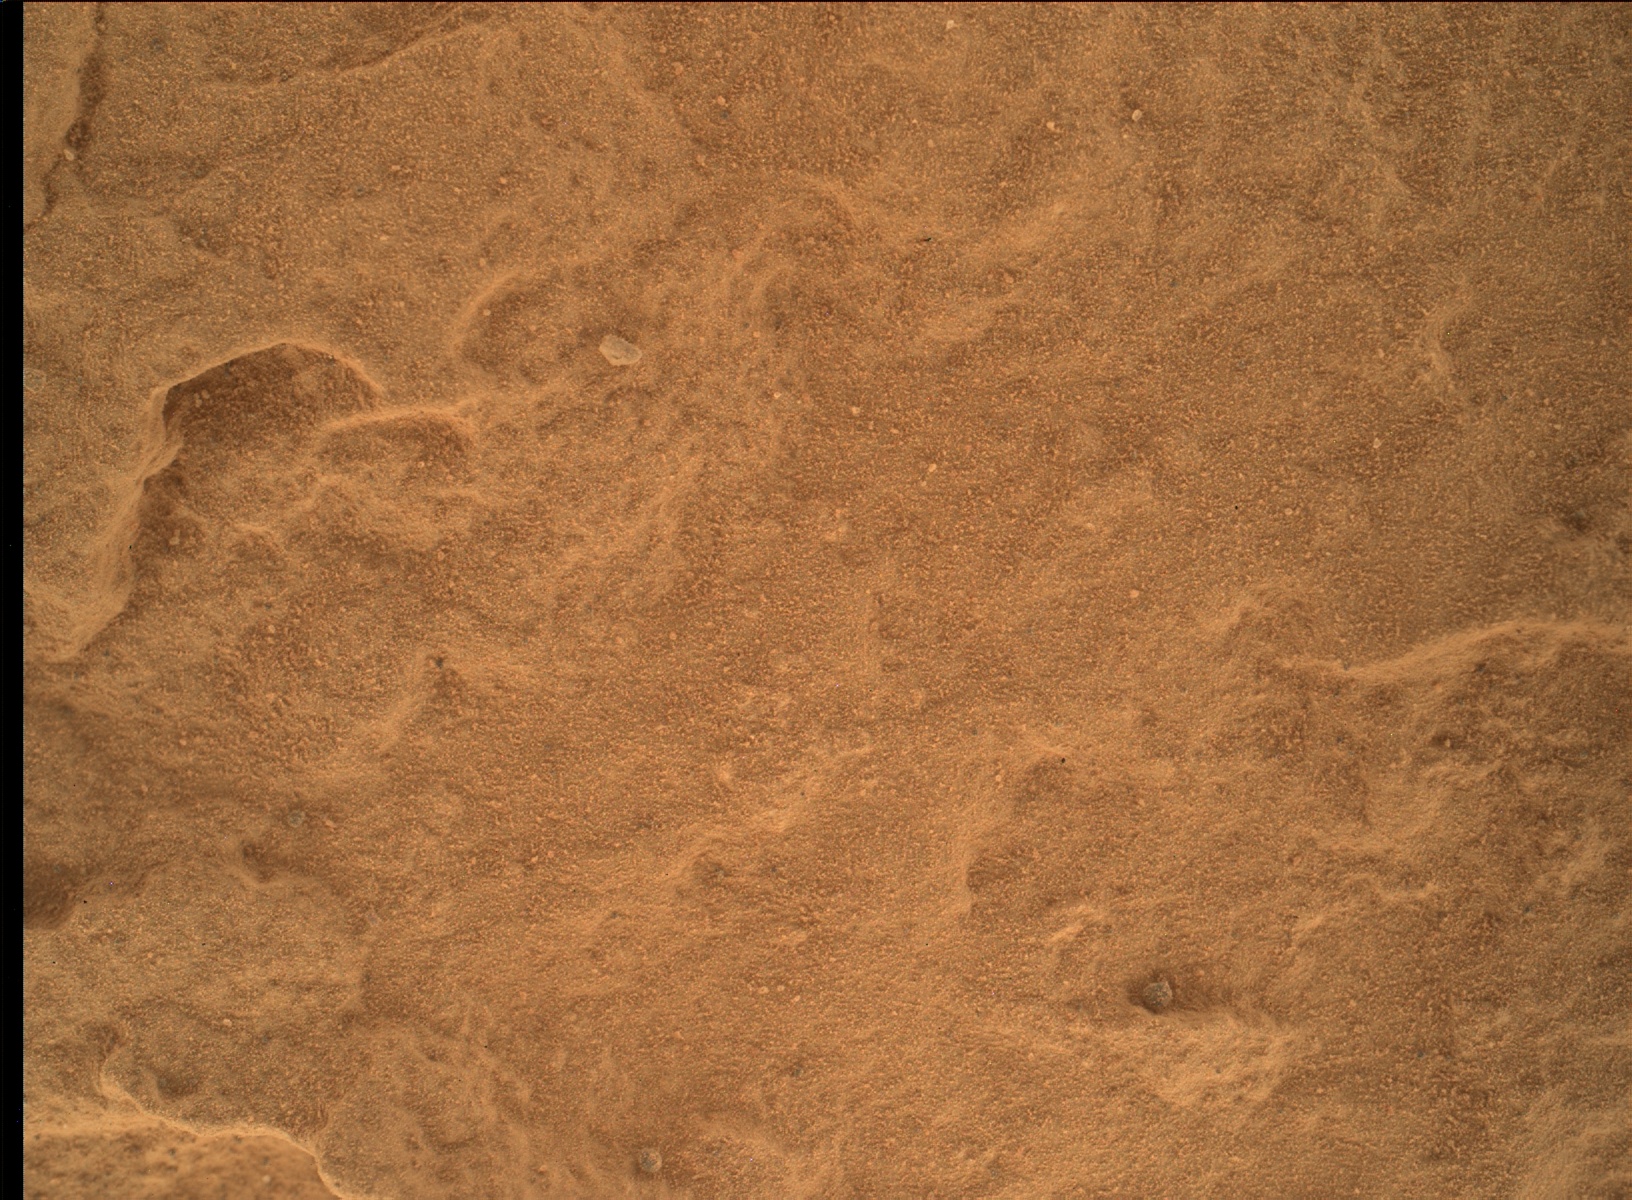 Nasa's Mars rover Curiosity acquired this image using its Mars Hand Lens Imager (MAHLI) on Sol 1698